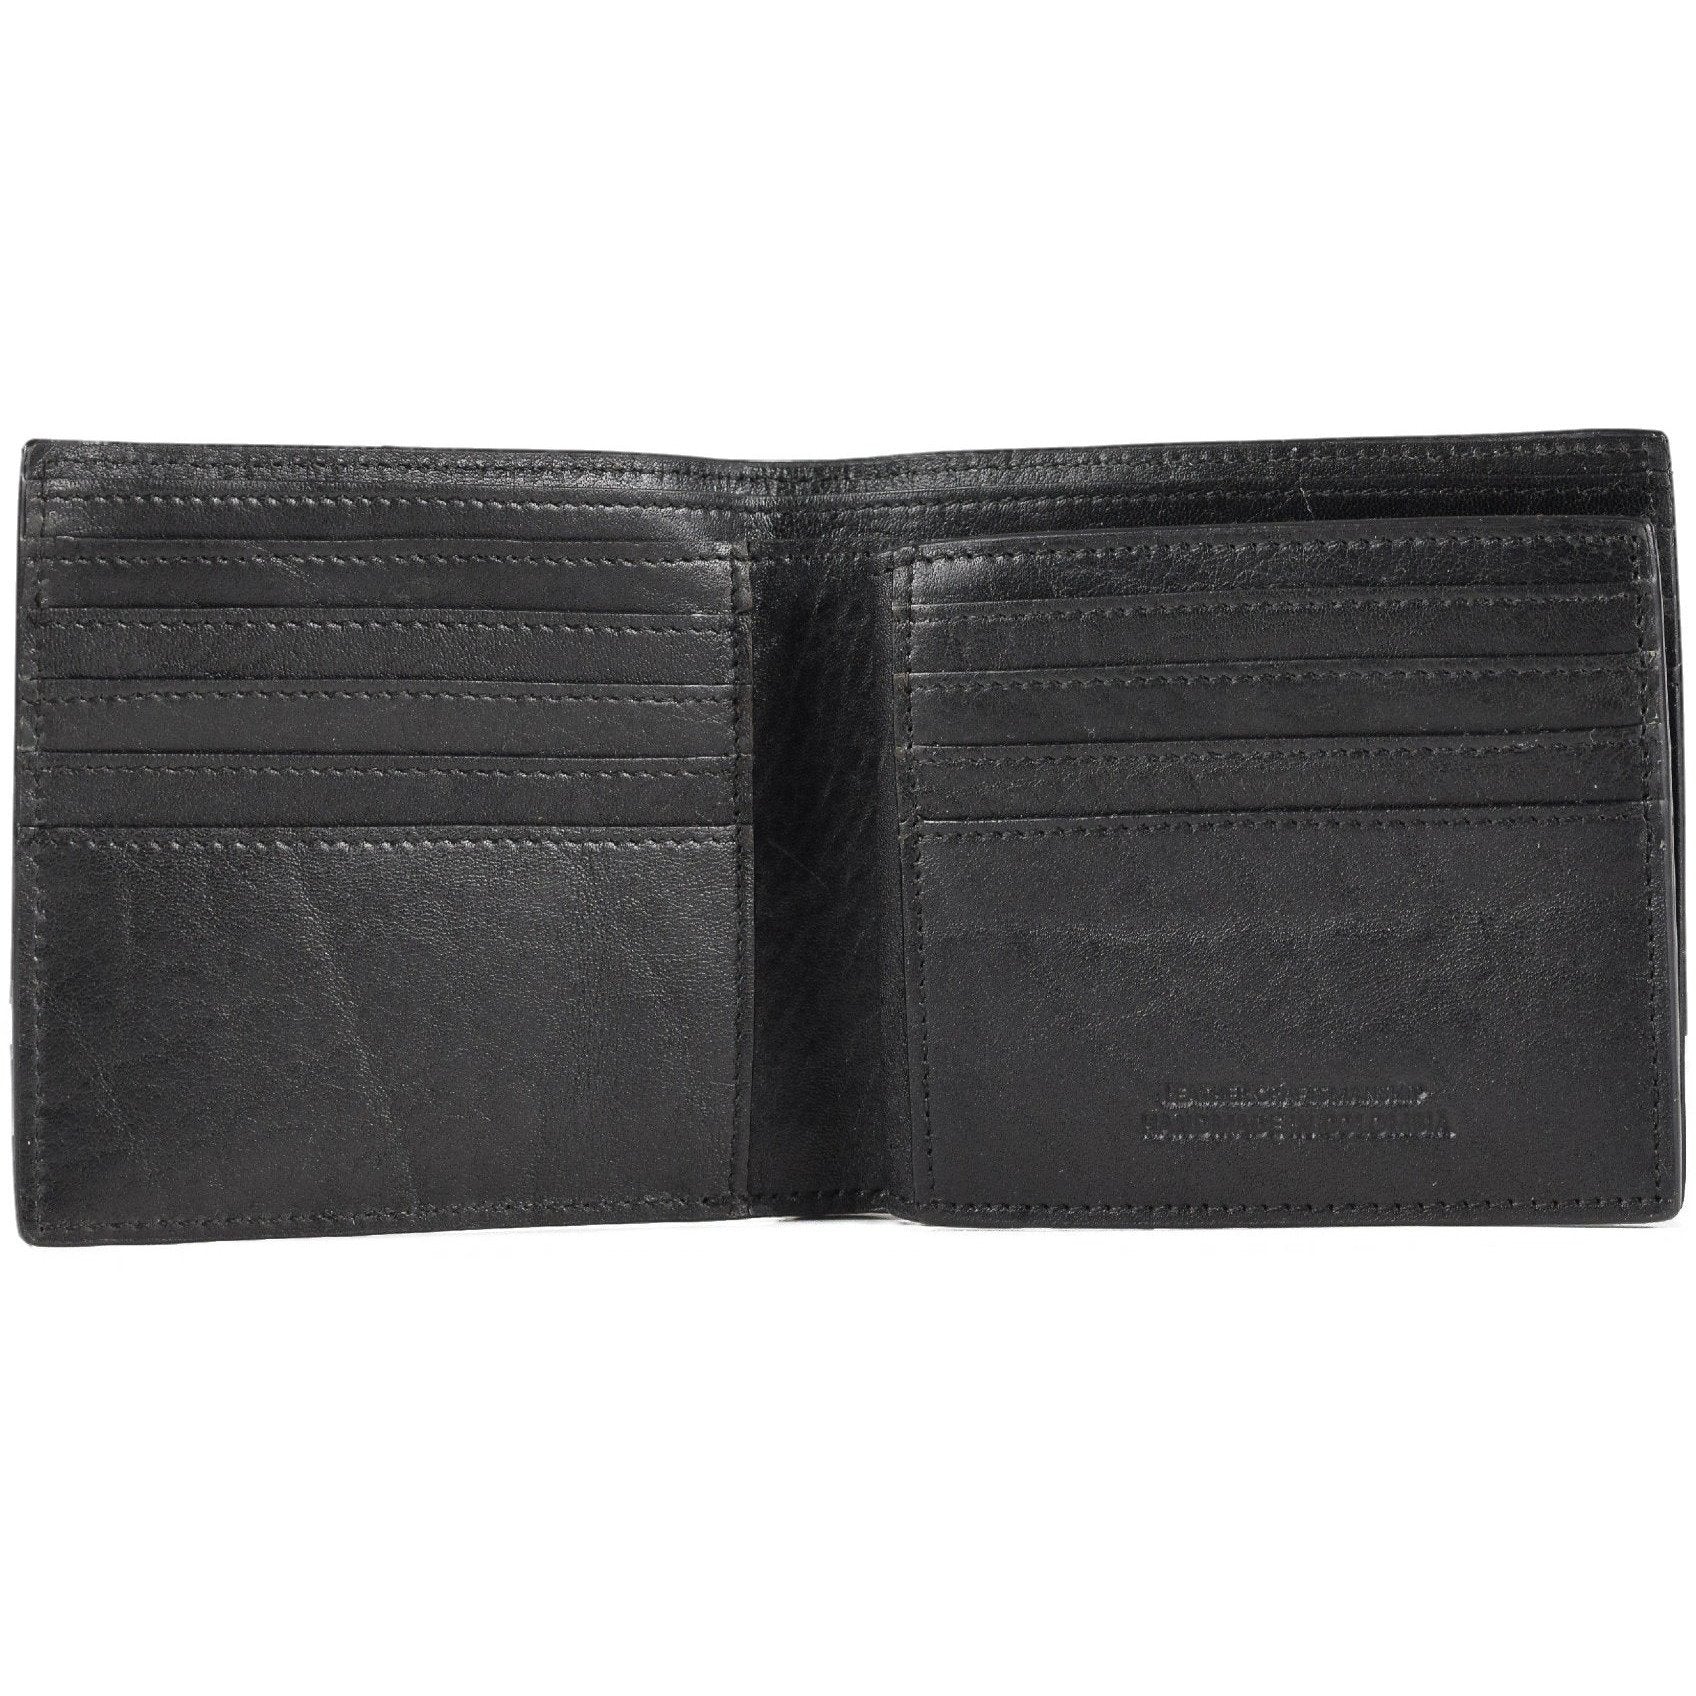 Limited Wallet | LAND Leather